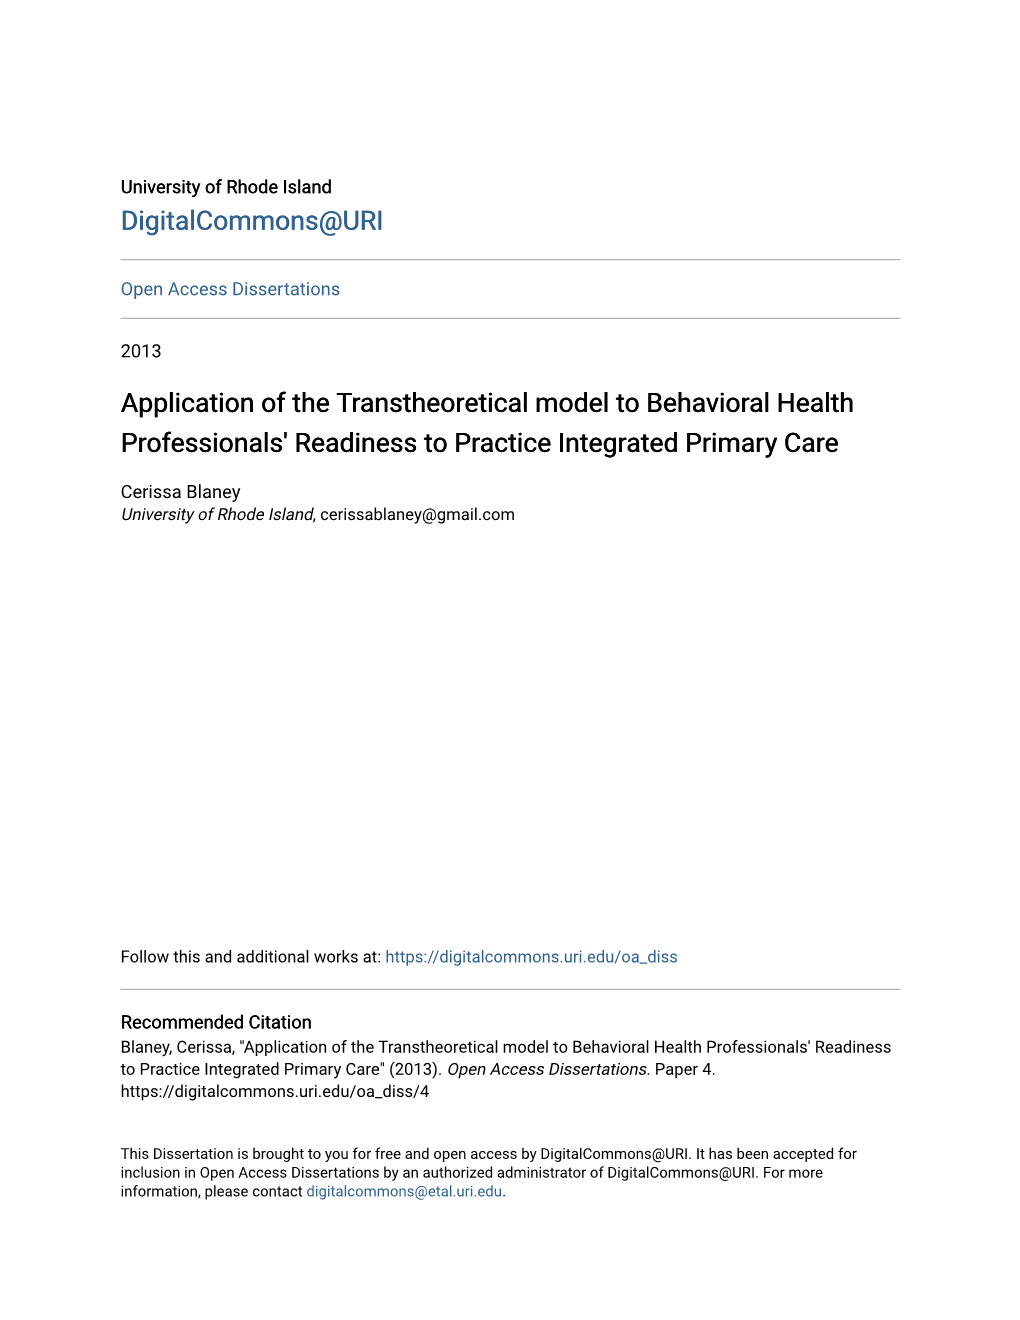 Application of the Transtheoretical Model to Behavioral Health Professionals' Readiness to Practice Integrated Primary Care